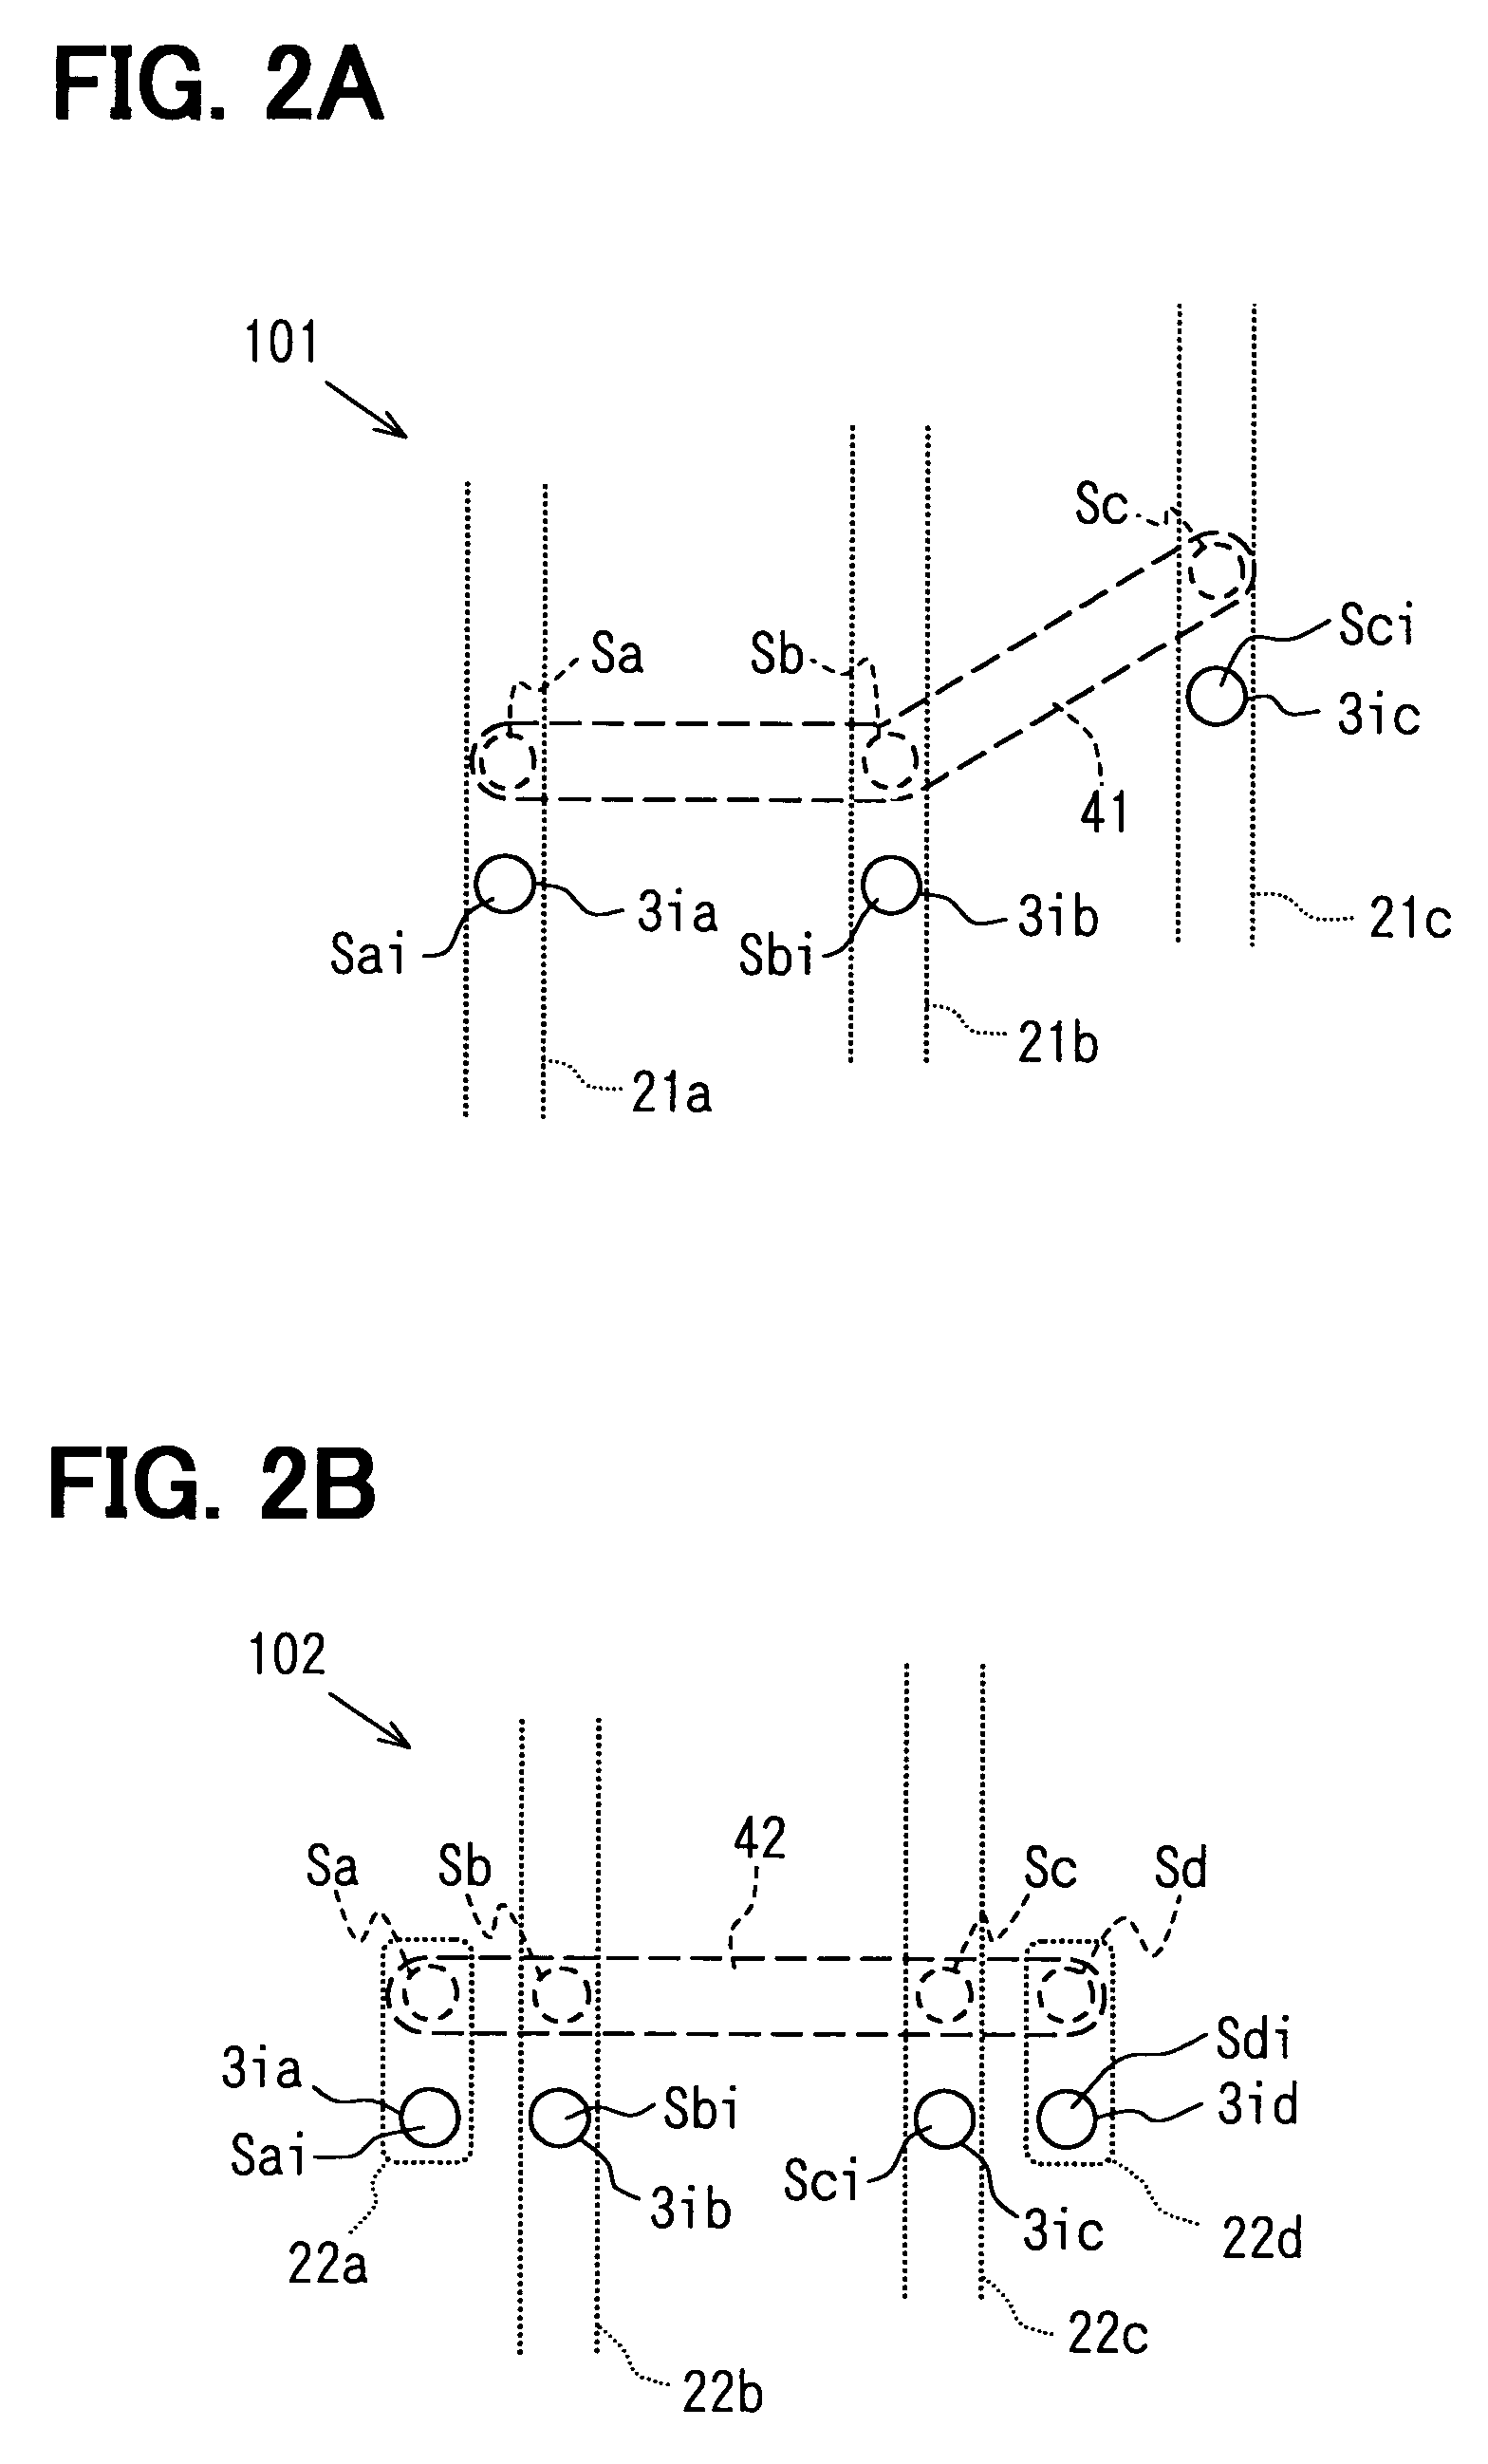 Circuit board having test coupon and method for evaluating the circuit board